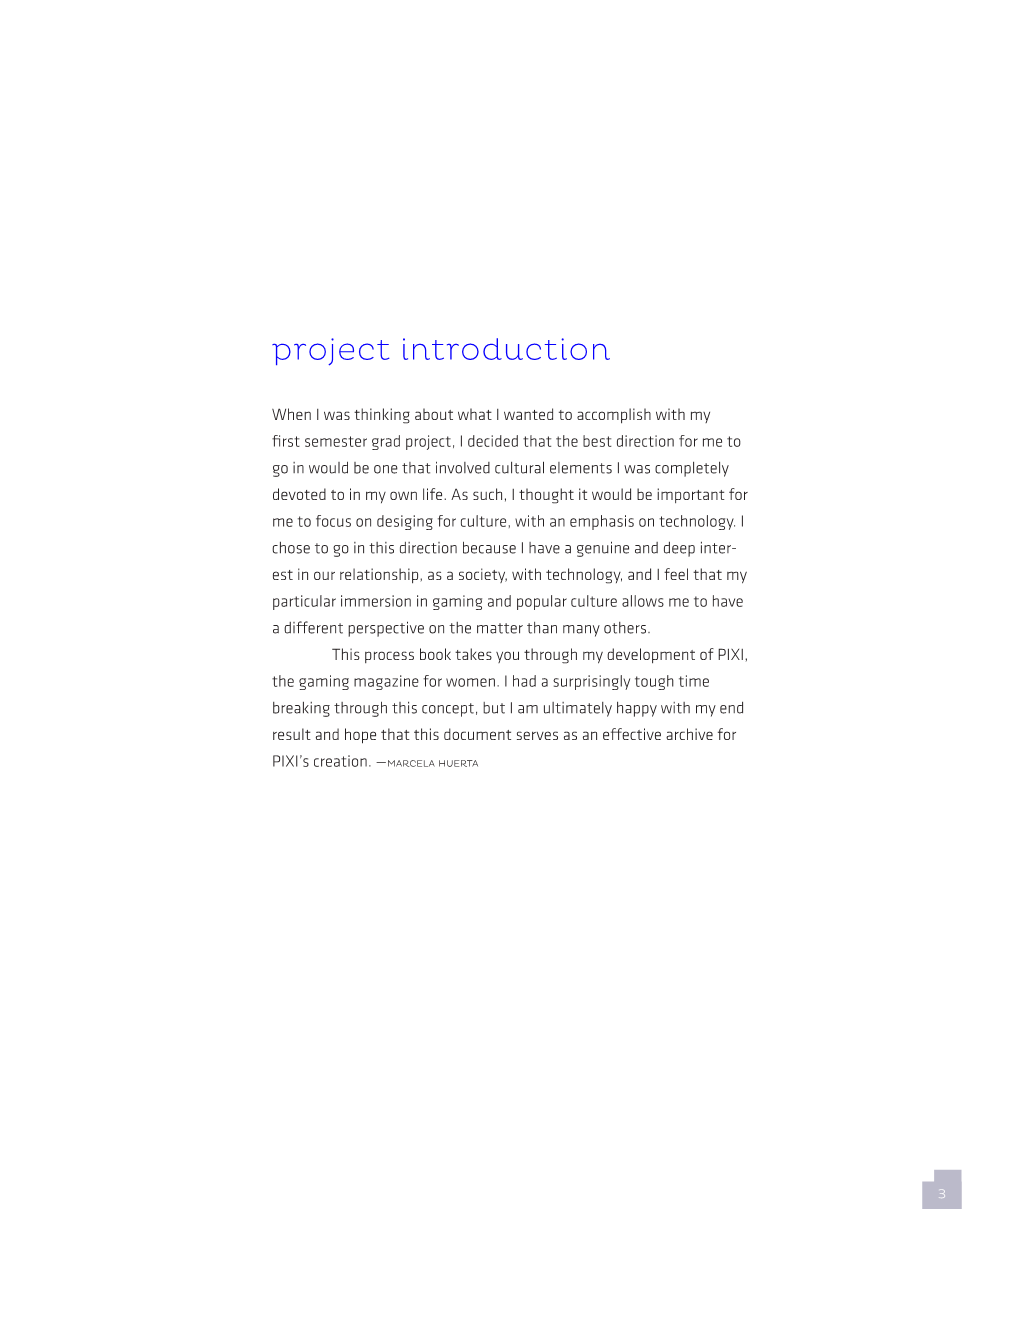 Project Introduction